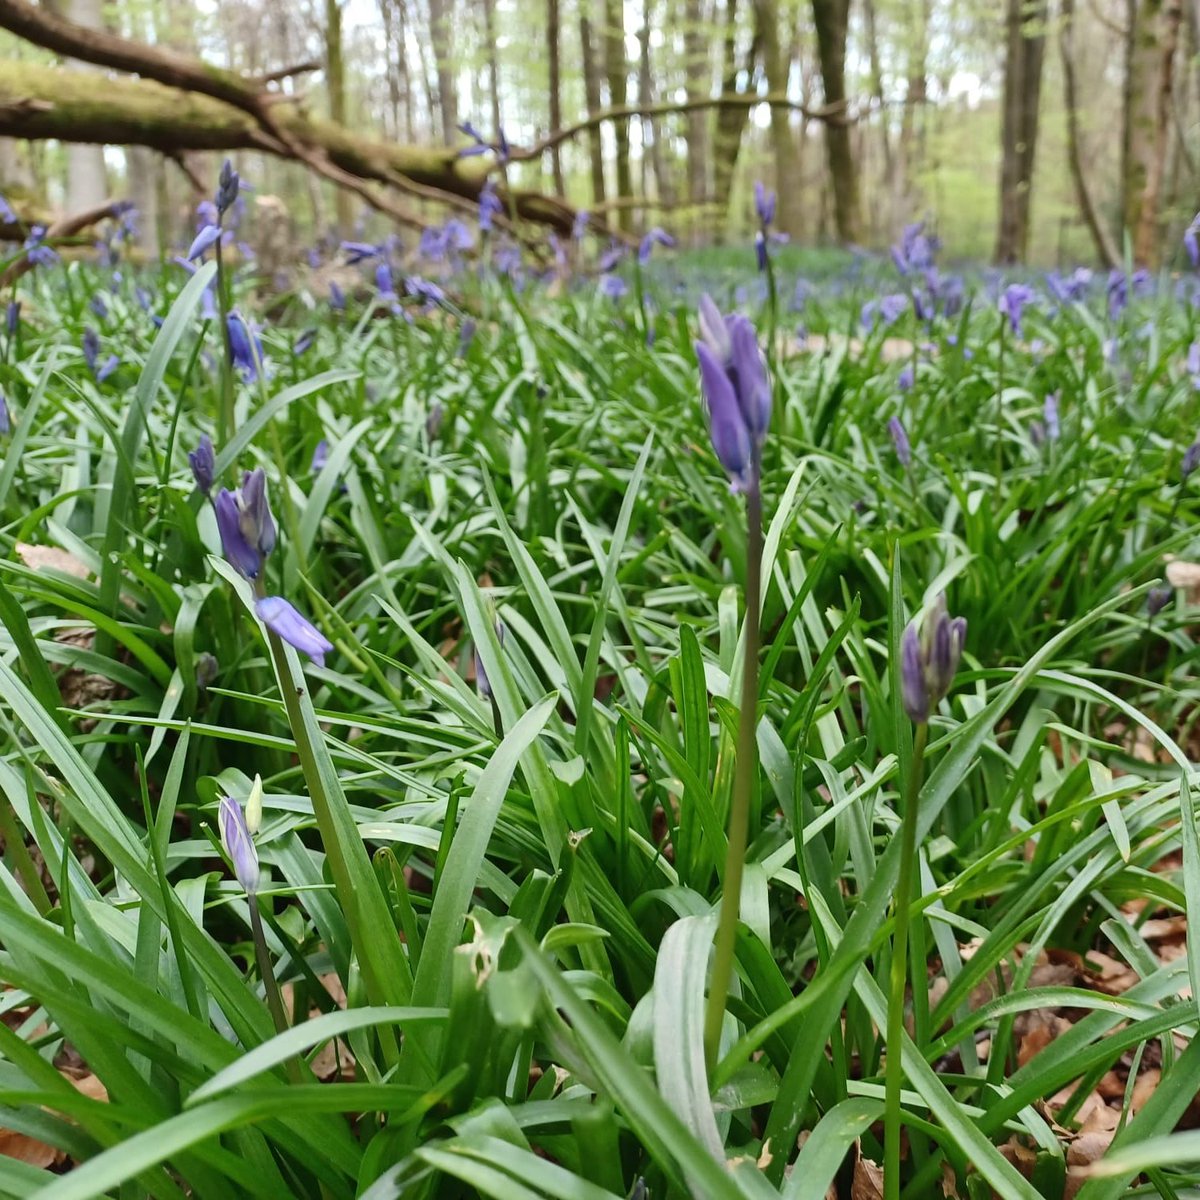 Gatwick Greenspace's Wildlife Watch Group spent the morning last week litter picking and hunting for Bluebells. We found both! Help protect Wildlife, remember to bin your litter or take it home!
#Crawley
photos © Tamara Jewell